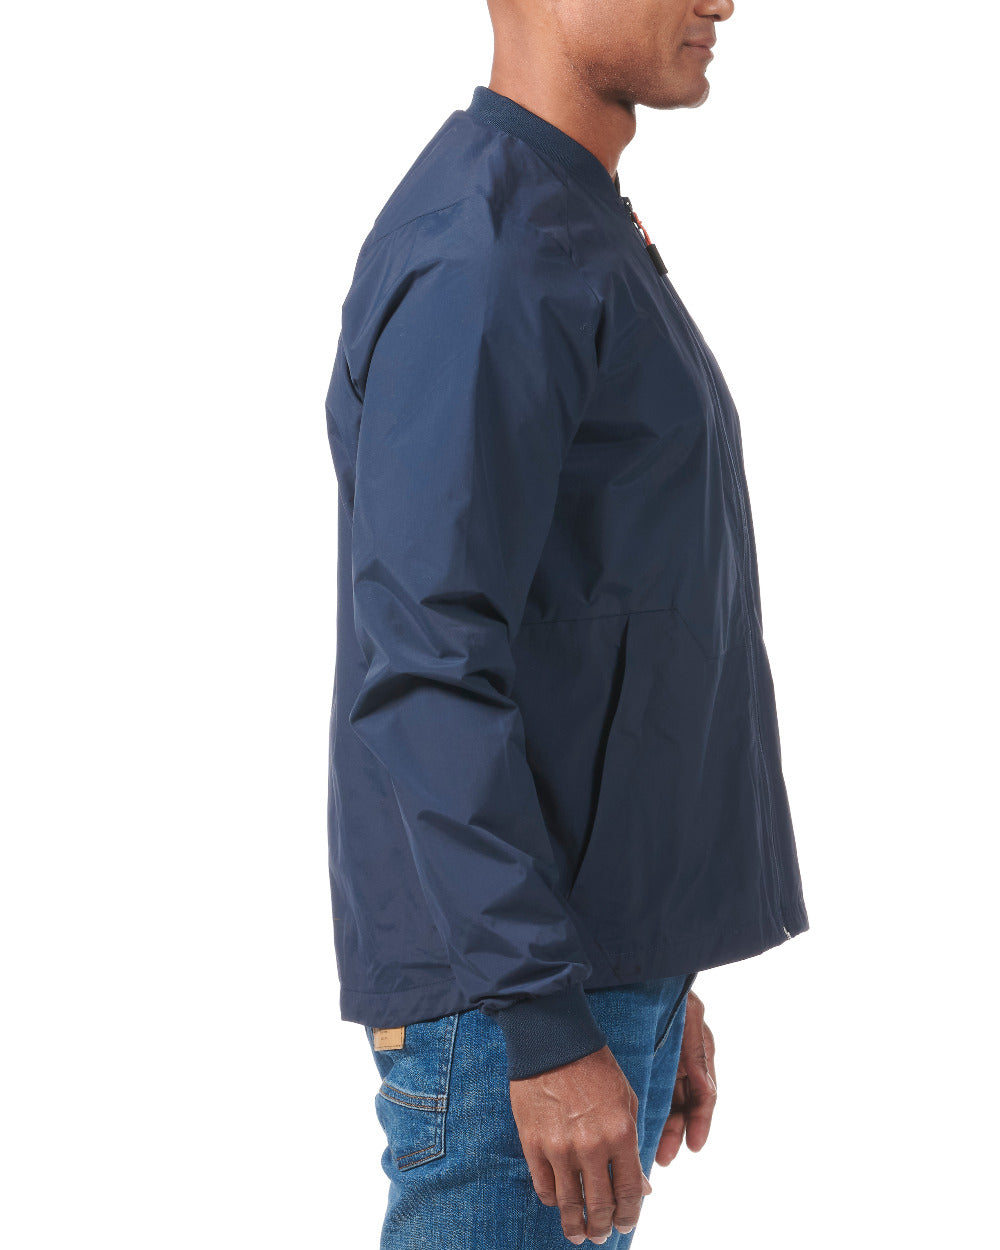 Navy Coloured Musto Mens Land Rover Technical Bomber On A White Background 